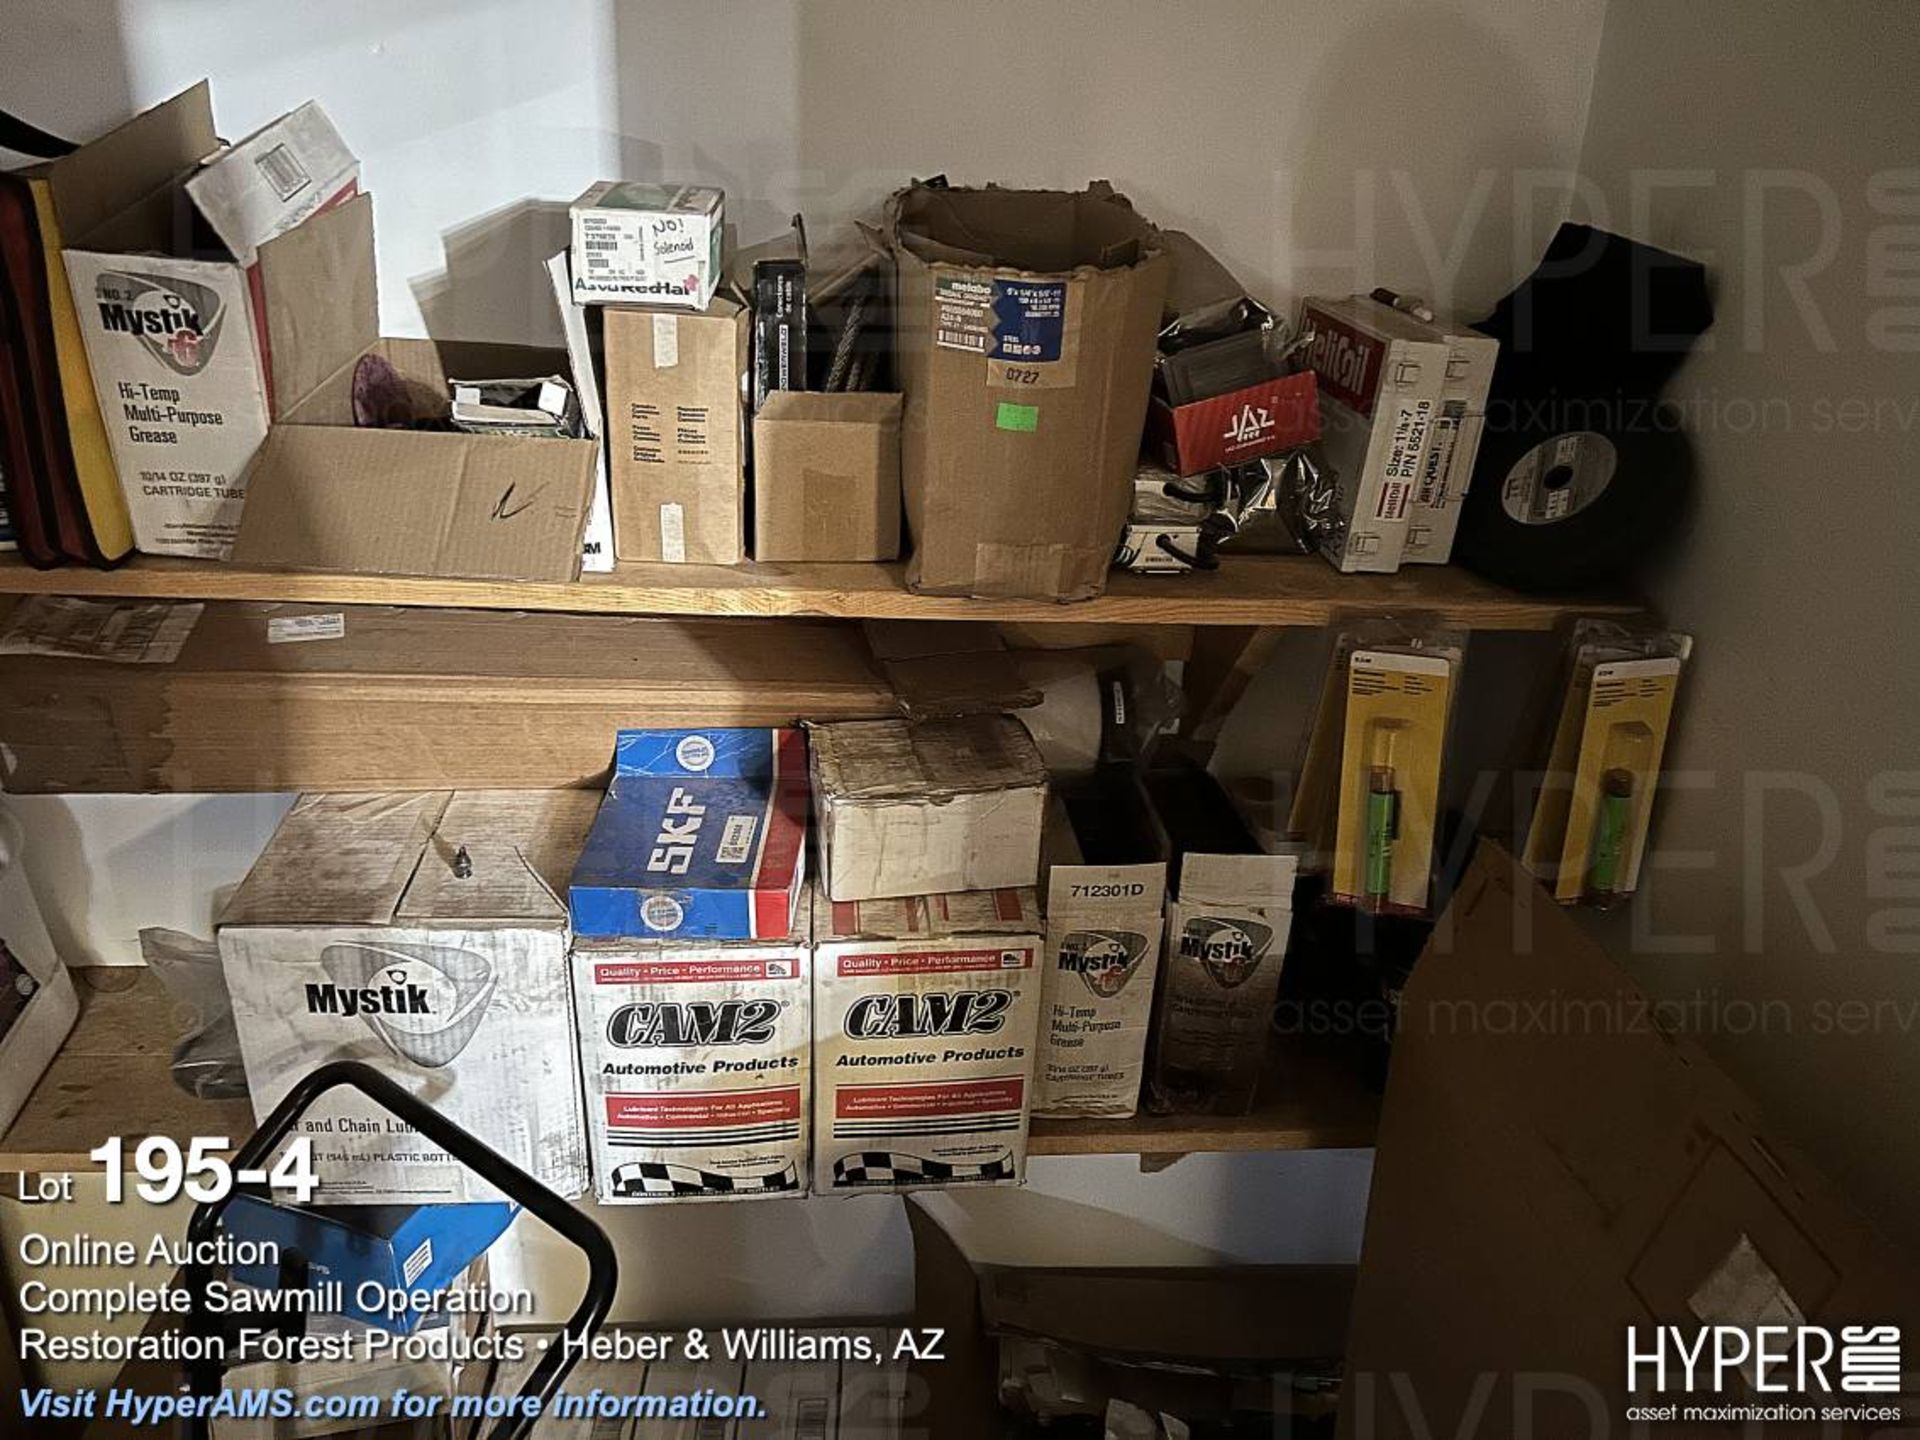 Lot: Lights, desks, table, refrigerator, shelves, grease and supplies - Image 4 of 5